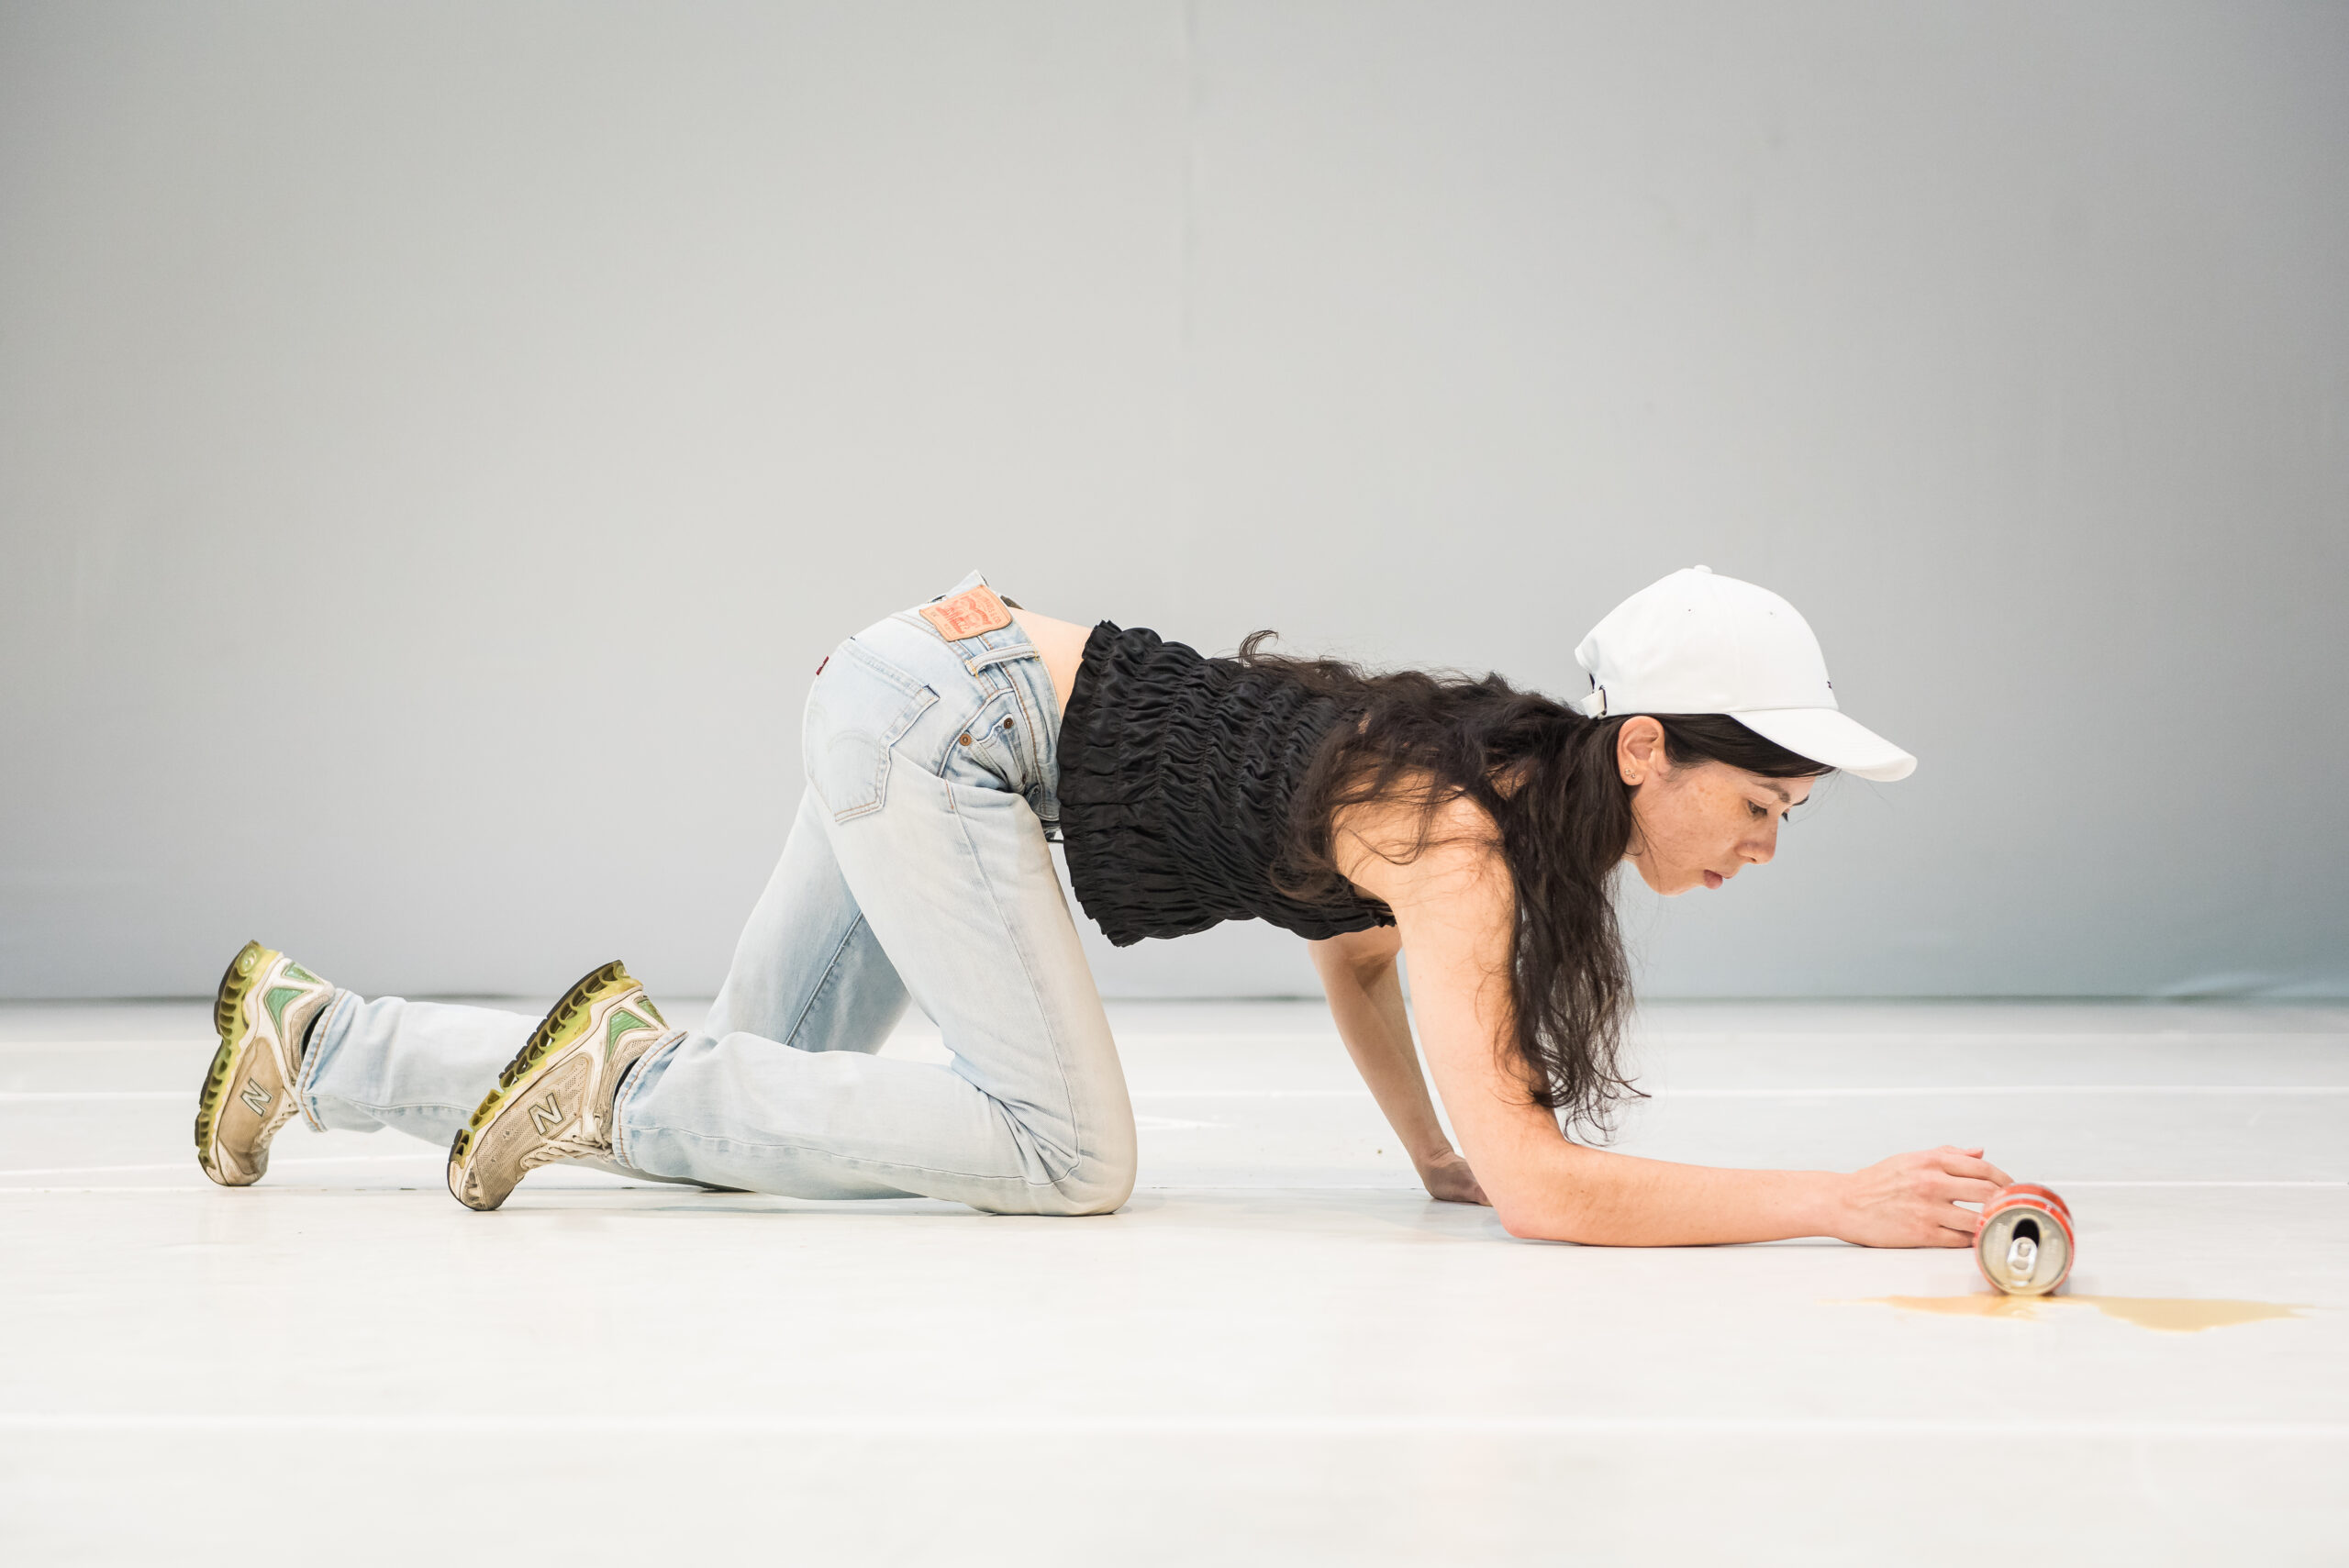 This is a photograph of a woman who is wearing a black sleeveless top, light blue jeans, brown sneakers and white hat. She is crawling on the floor and there is a spilt can of Coca Cola in front of her.